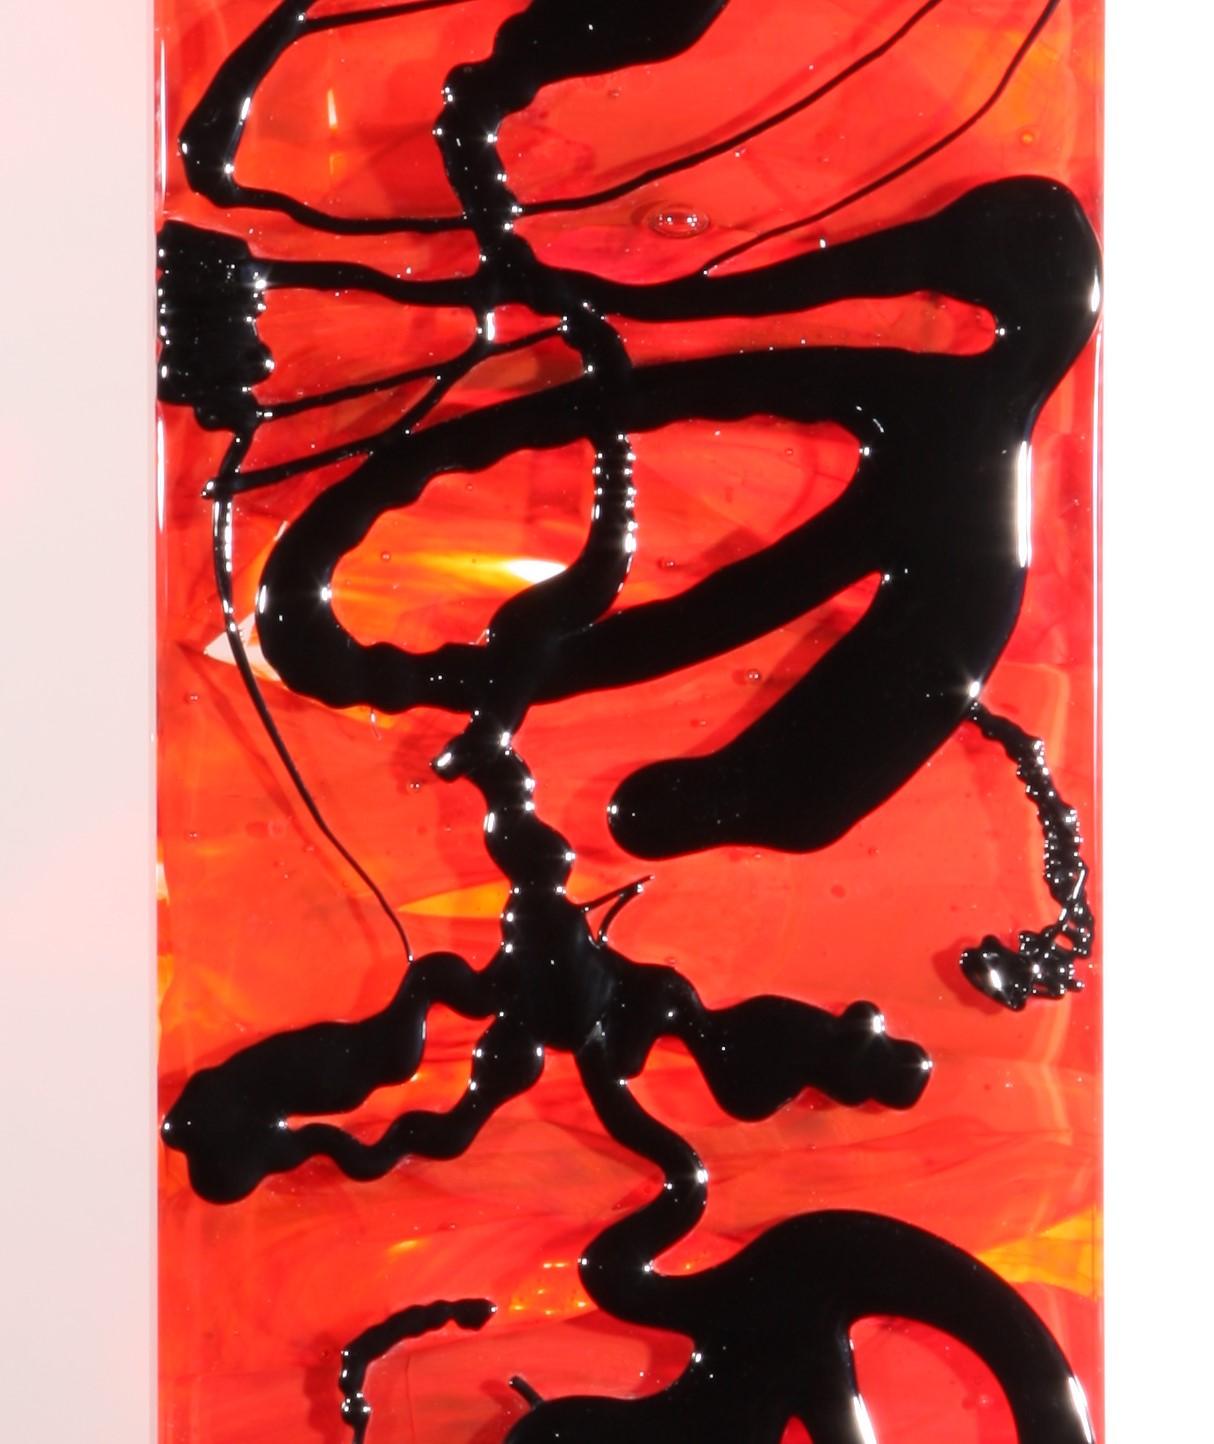 Abstract Cast Glass Sculpture, 'Baquba', 2008 by David Ruth For Sale 2